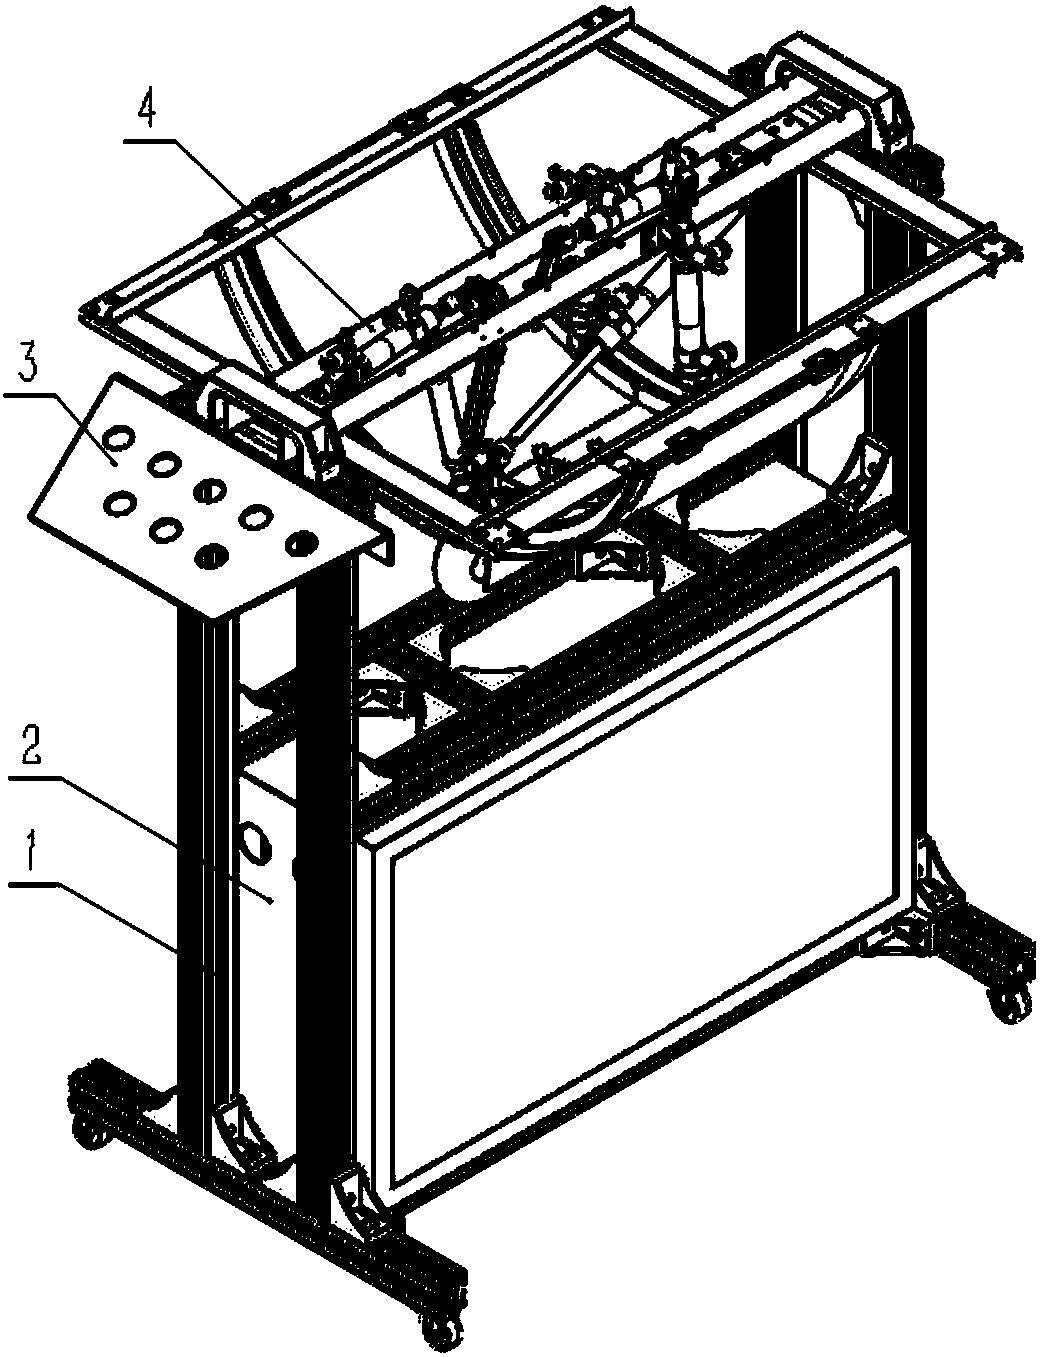 Demonstration instrument for extension and retraction process of aircraft landing gear